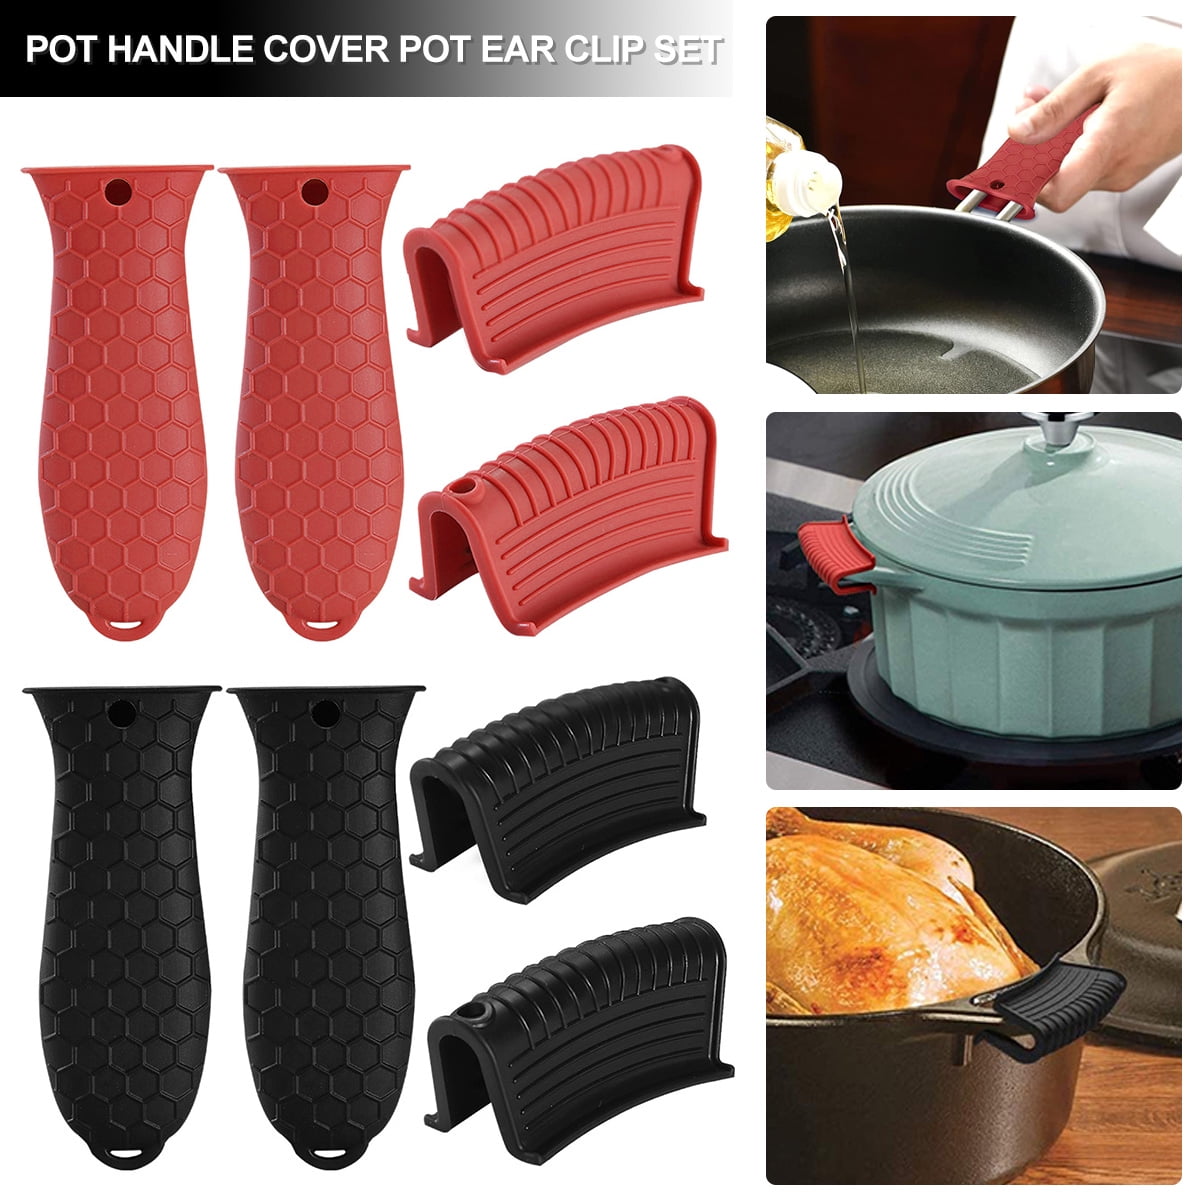 Silicone Trivet Mat Set for Hot Dishes,Pots and Pans,3 Pack Silicone Pot Holders with 3pcs Durable Adhesive Hooks Easy to Hook and Store,Heat Resistant Black Non-Slip,Dishwasher Safe